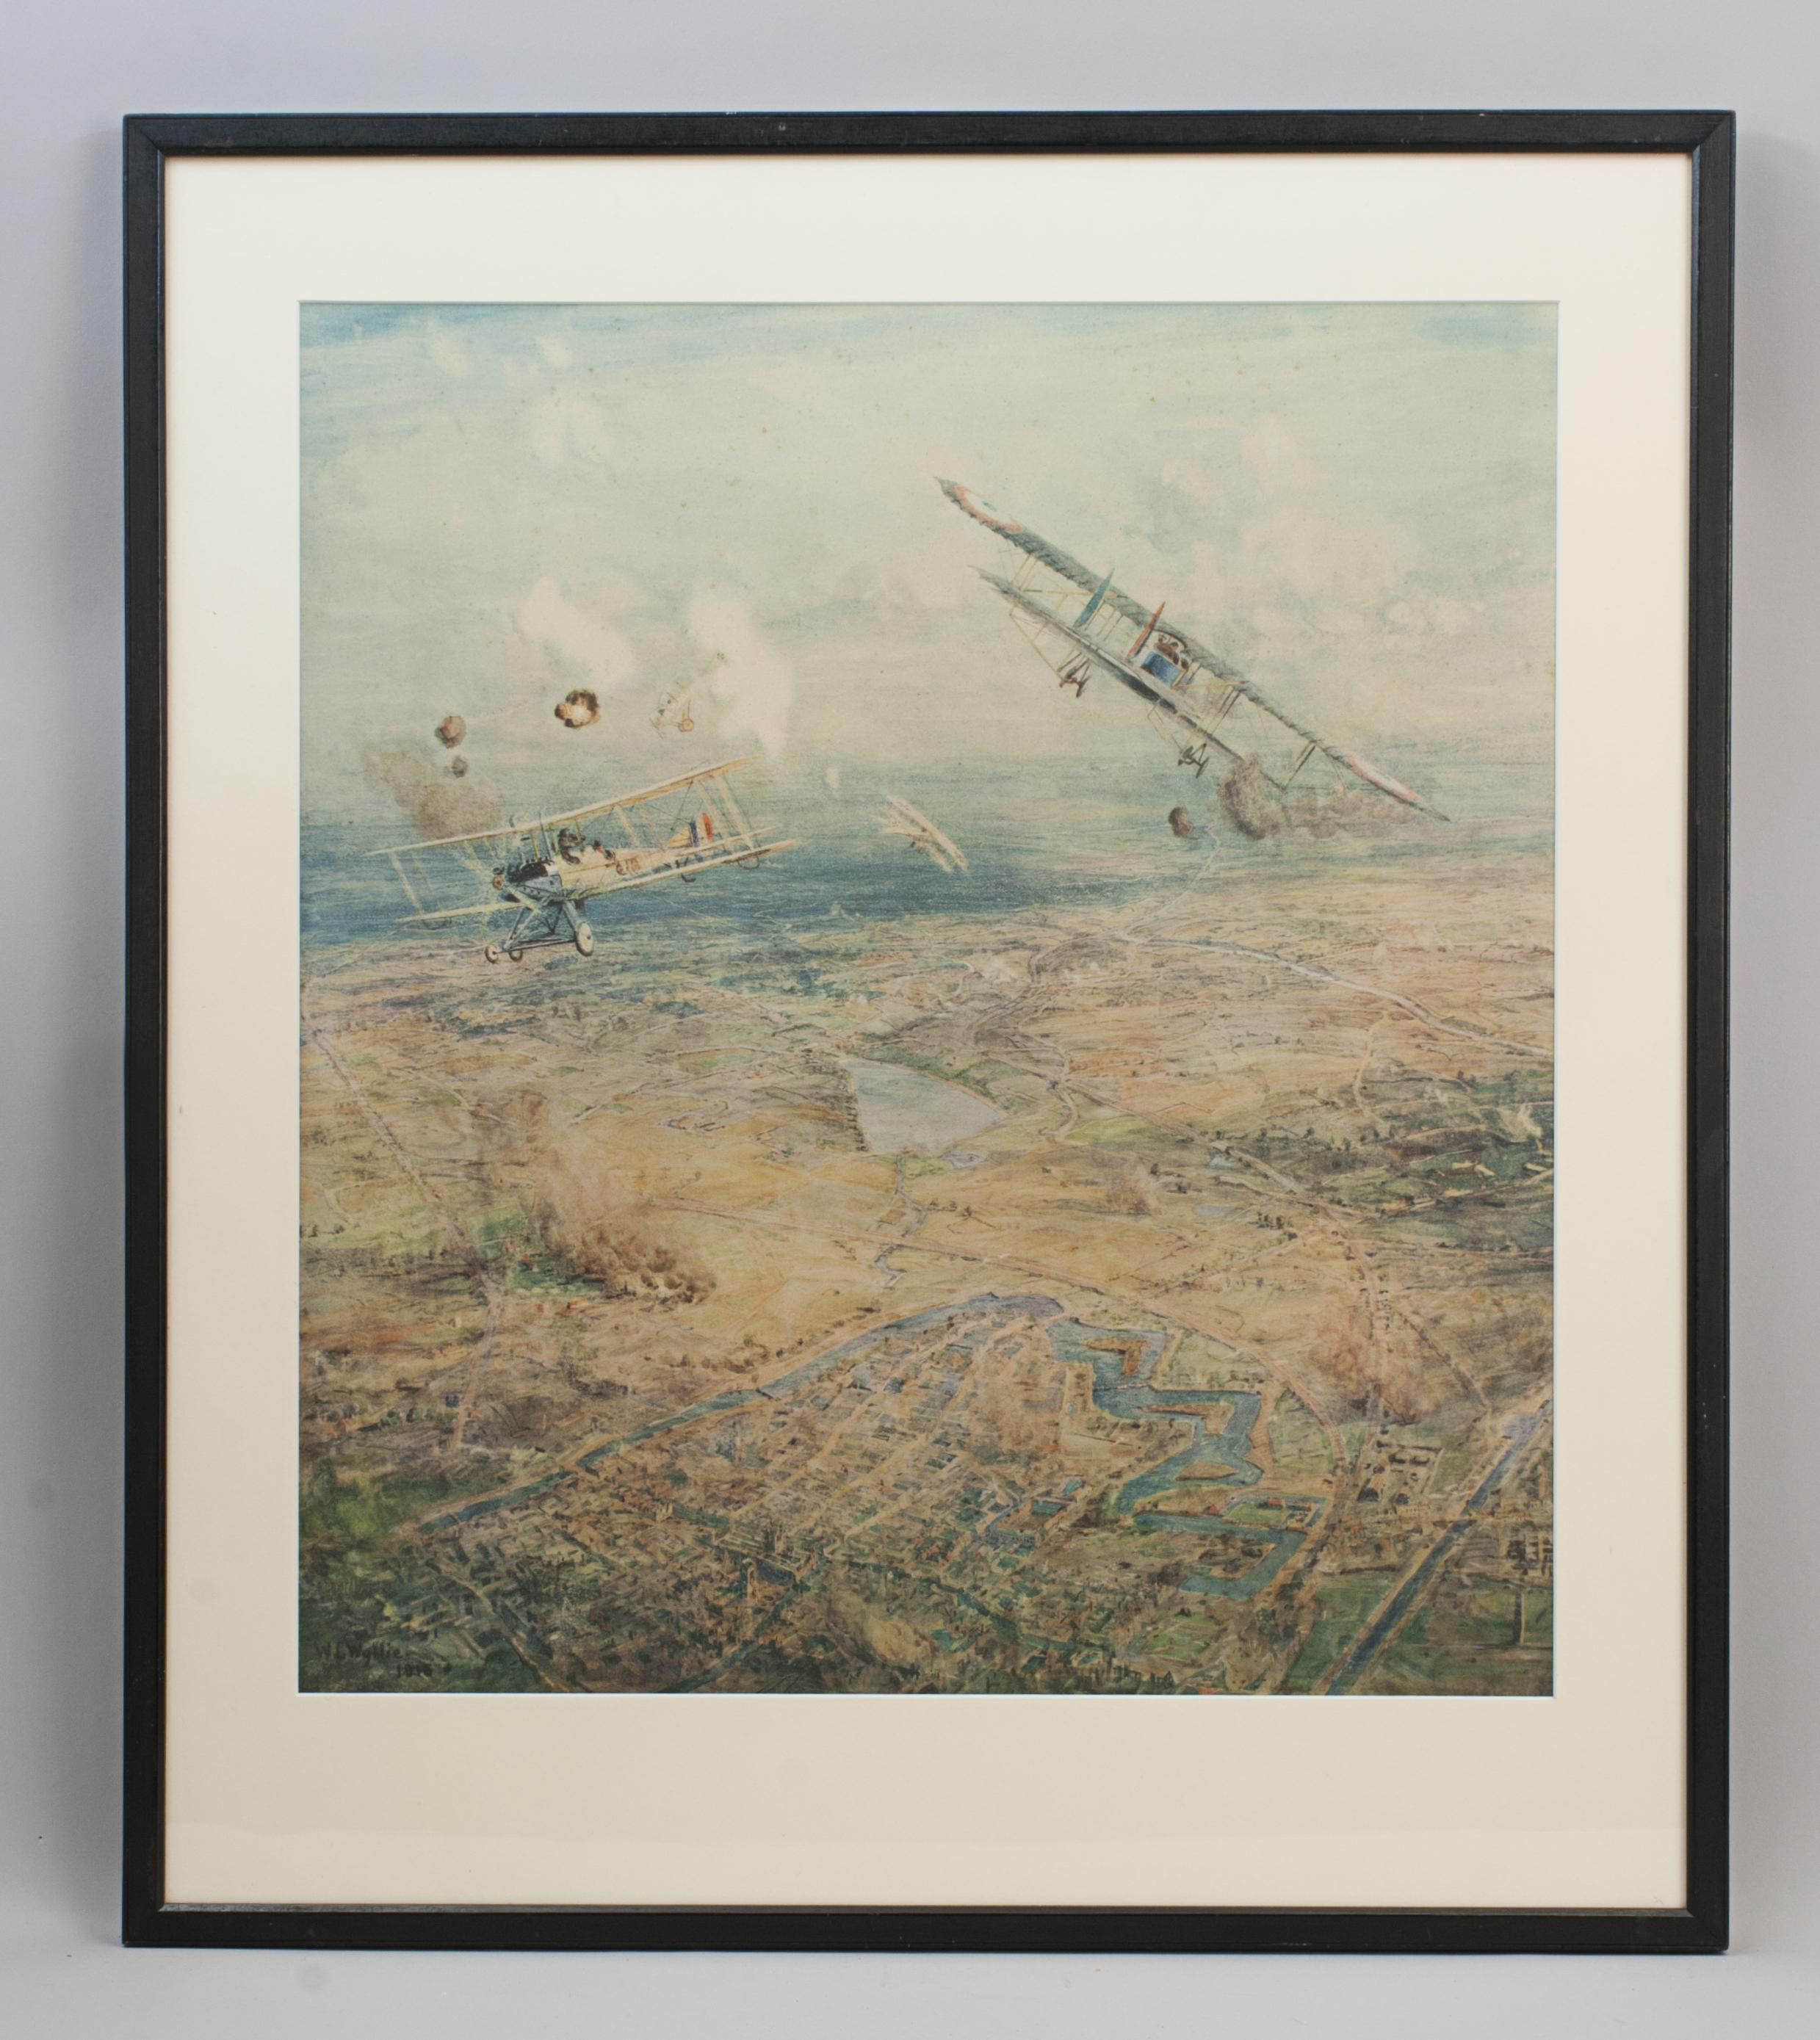 The Ypres Salient By William Lionel Wyllie.
A poignant reminder of WWI in this framed collotype of biplanes over Ypres by W.L. Wyllie, taken from his watercolour drawing 